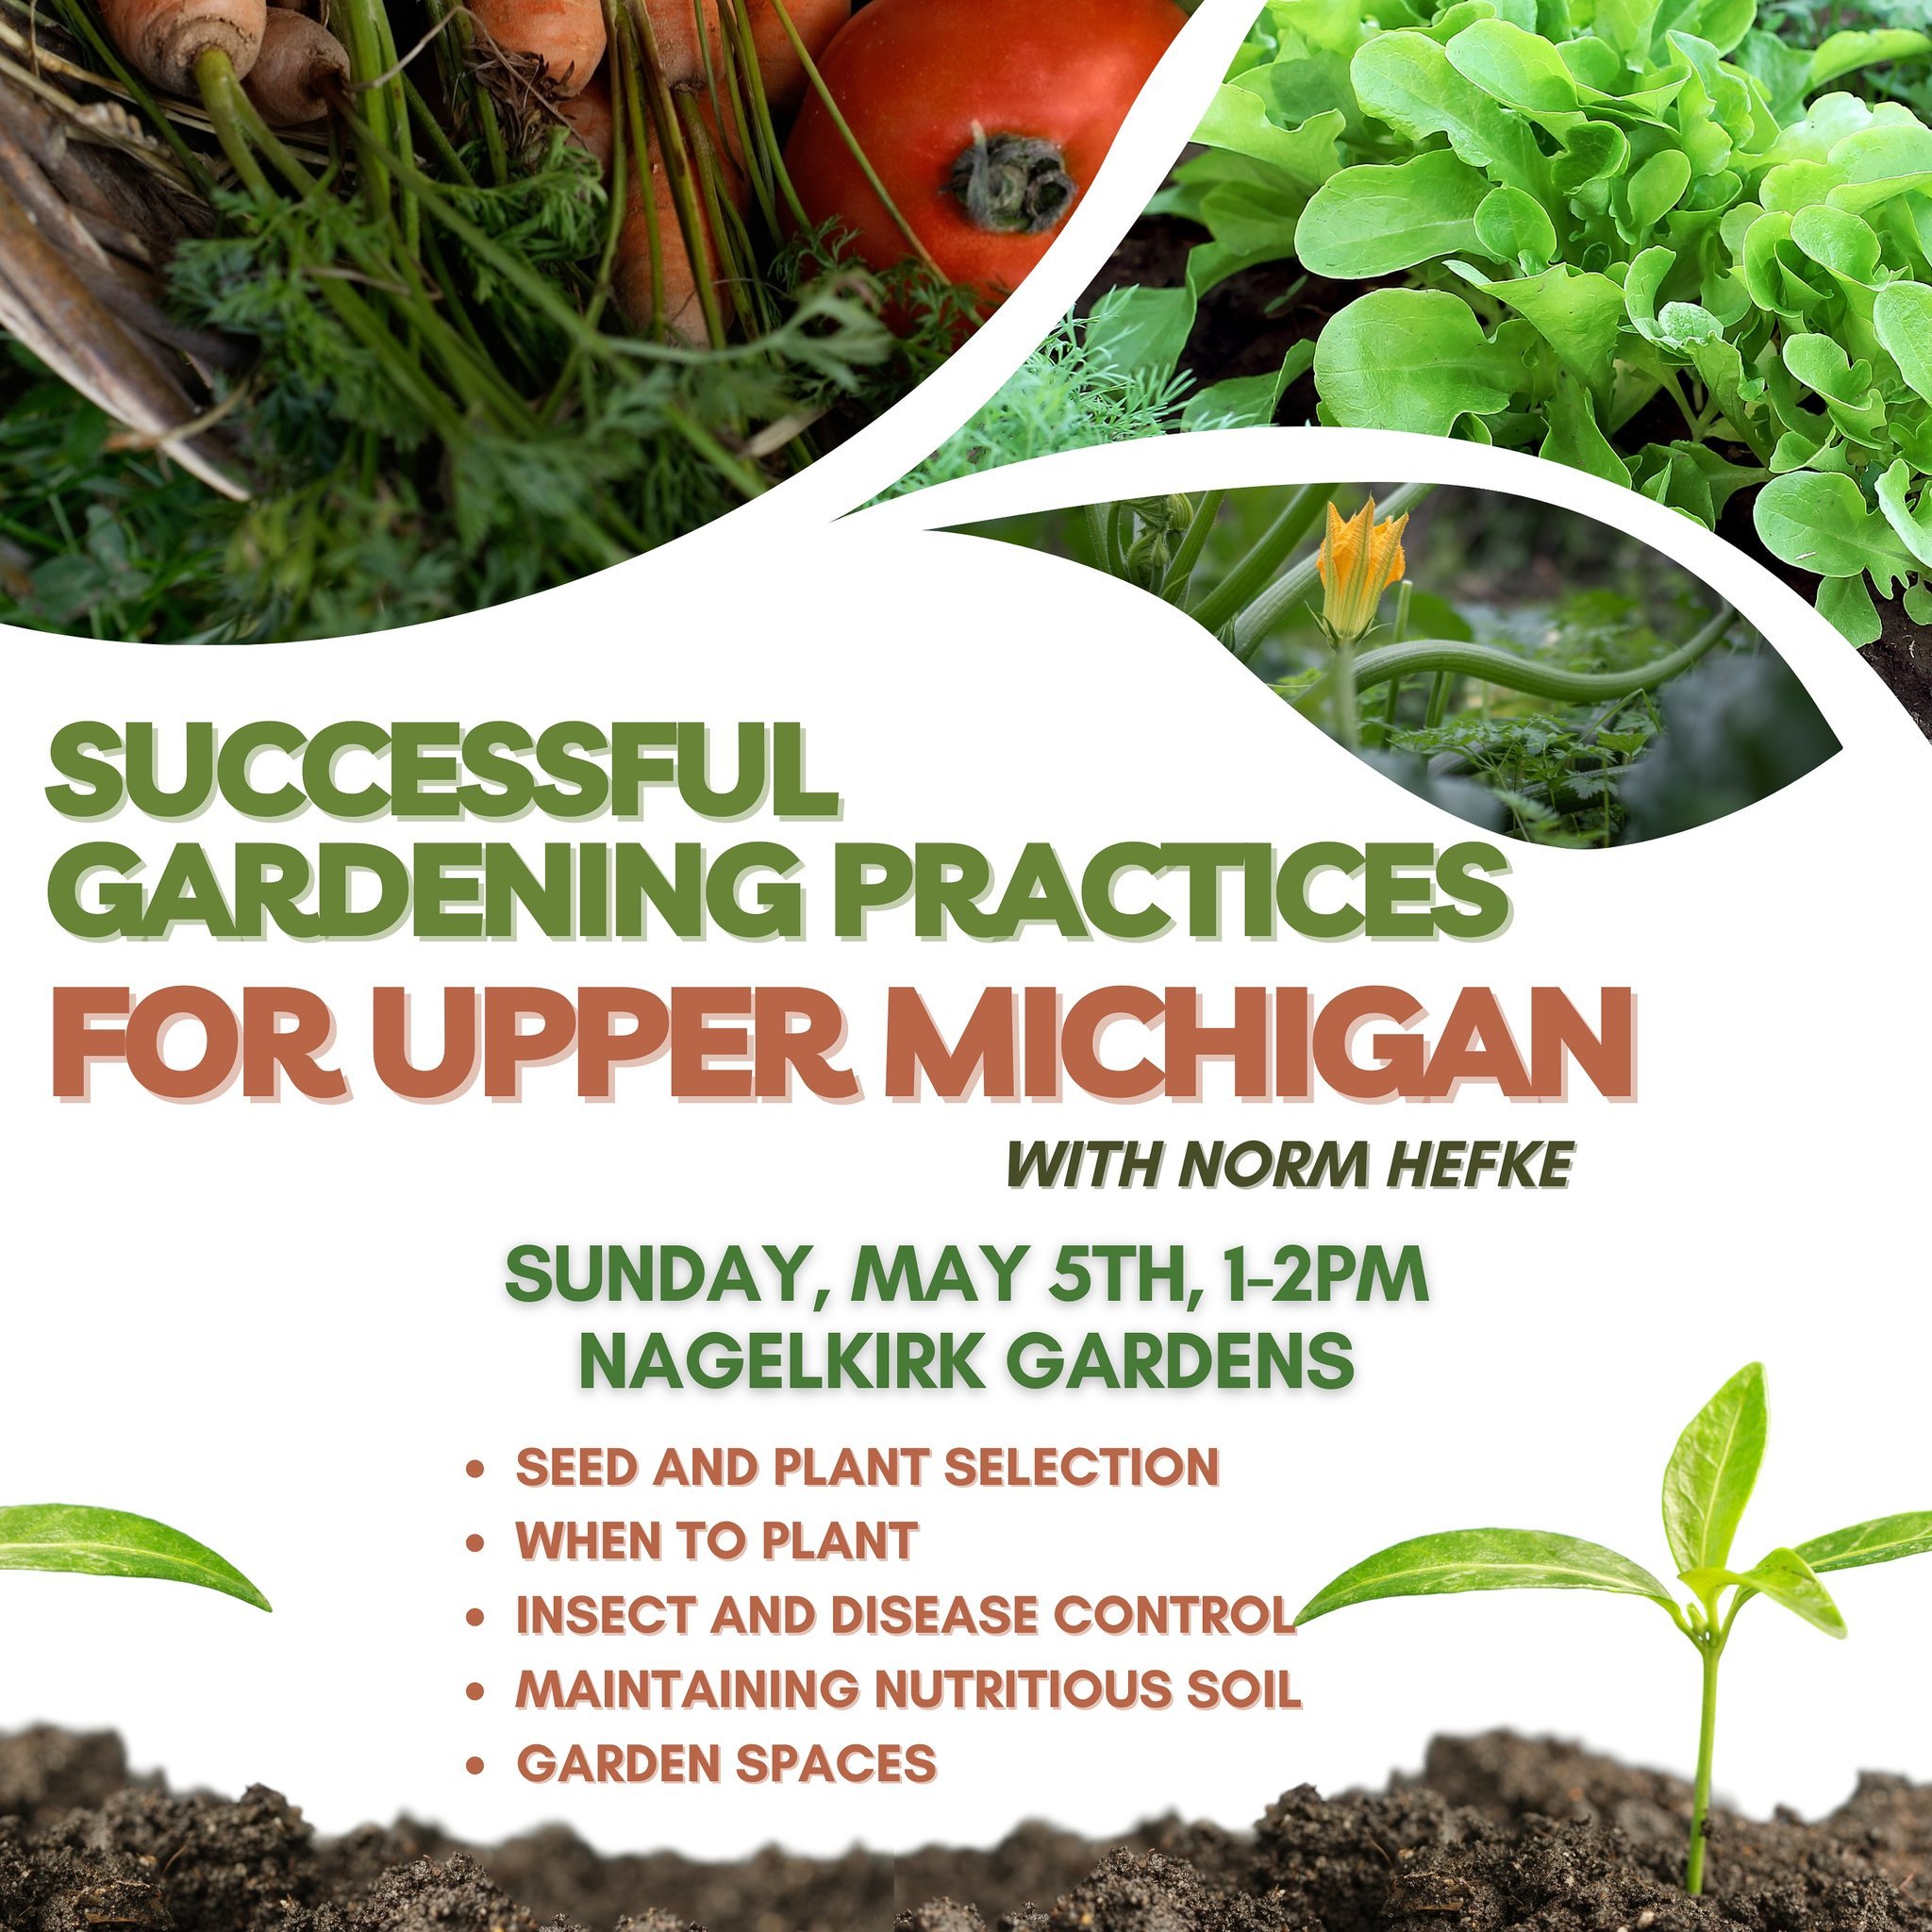 Join us one week from today for a talk by Norm Hefke! Topics covered will include seed and plant selection, when to plant, insect and disease control, maintaining nutritious soil, and garden spaces! Sunday, May 5th from 1-2pm! 🌱